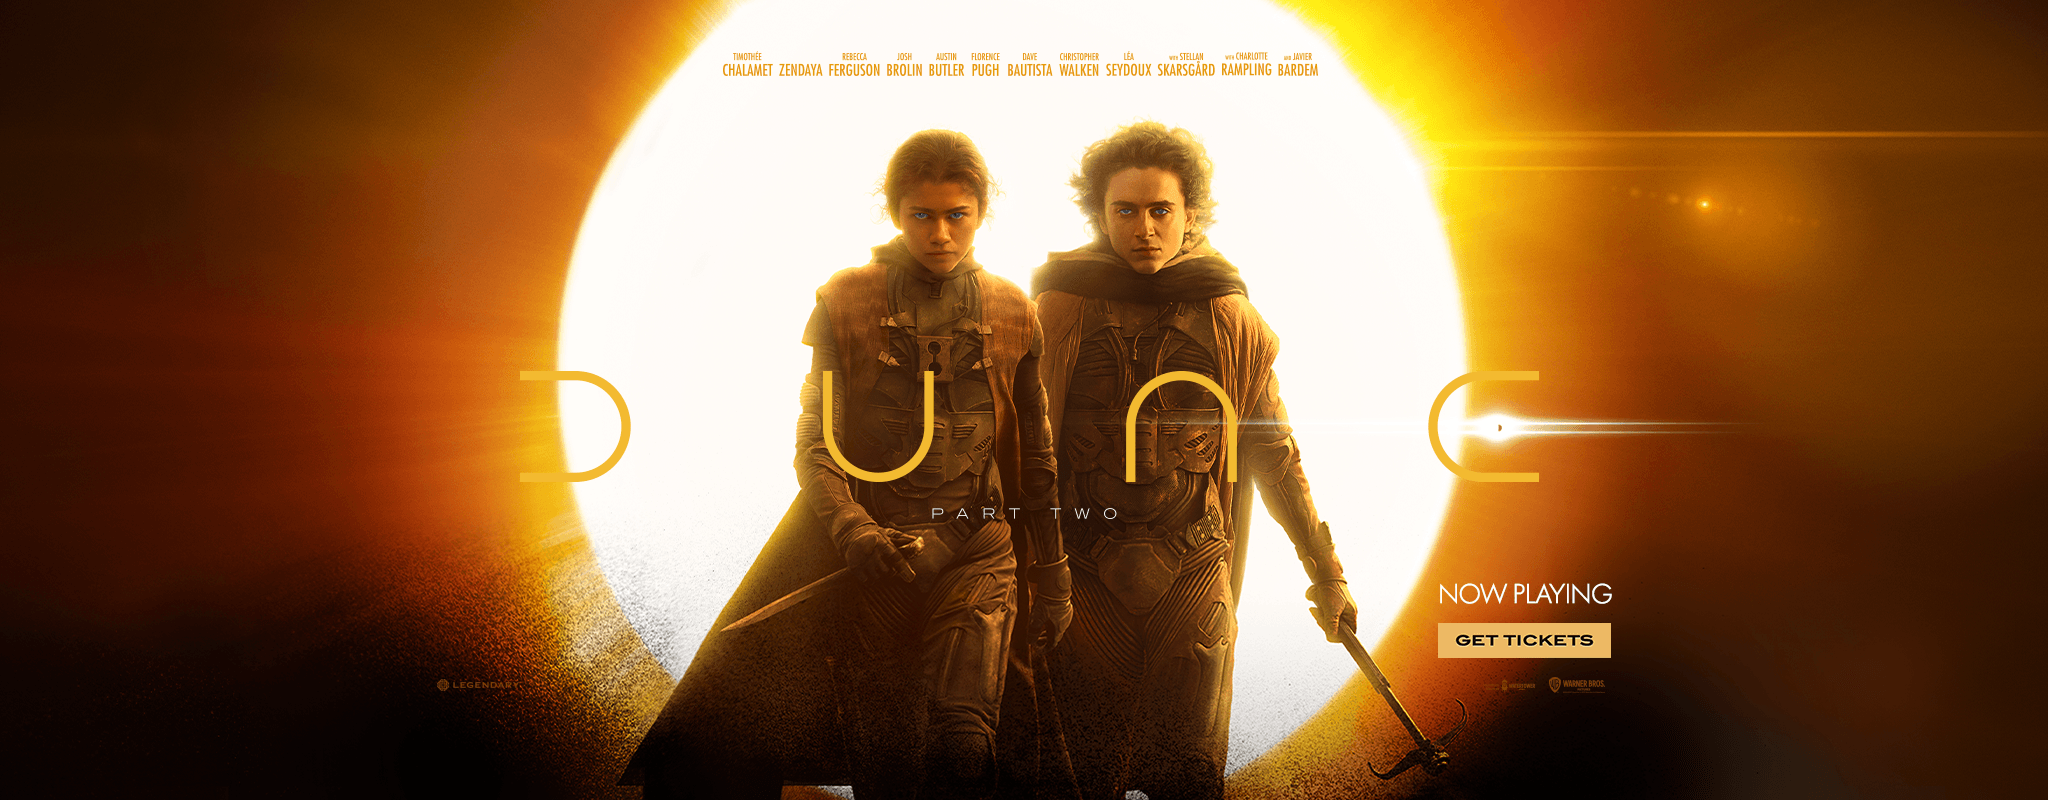 Dune part two, only in thetares March 01. Get tickets